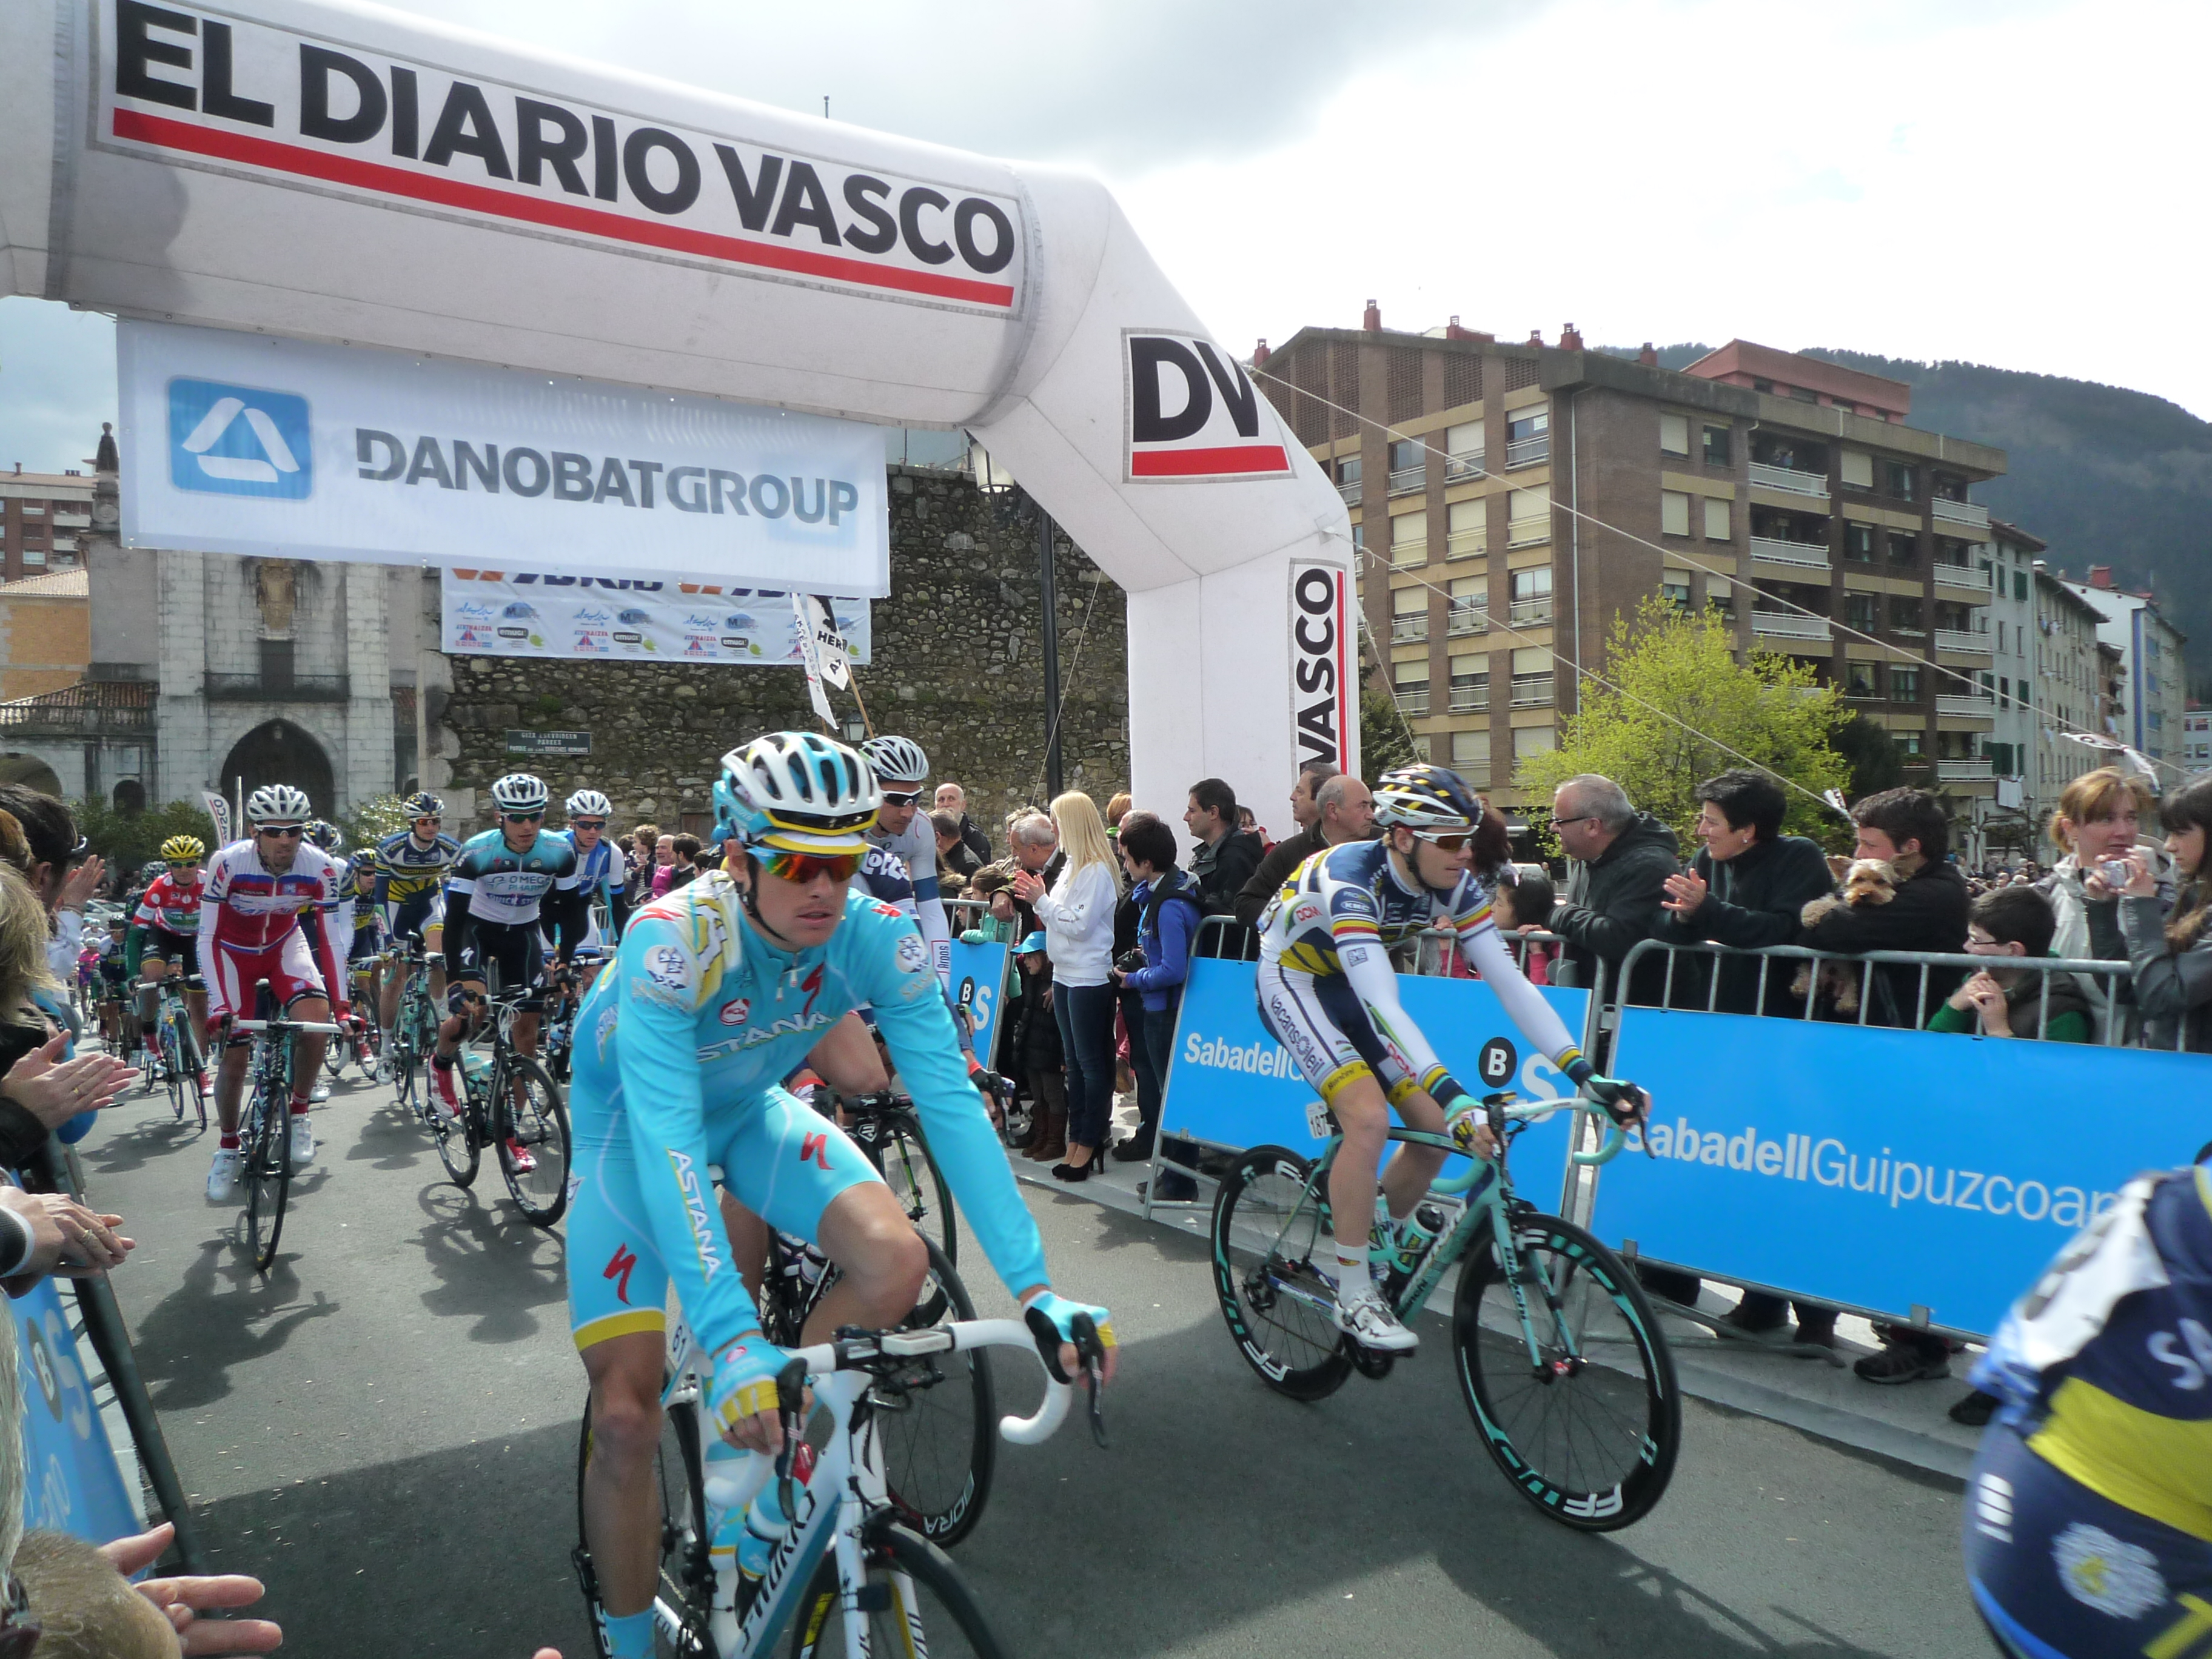 DANOBATGROUP sponsors the Tour of the Basque Country 2013